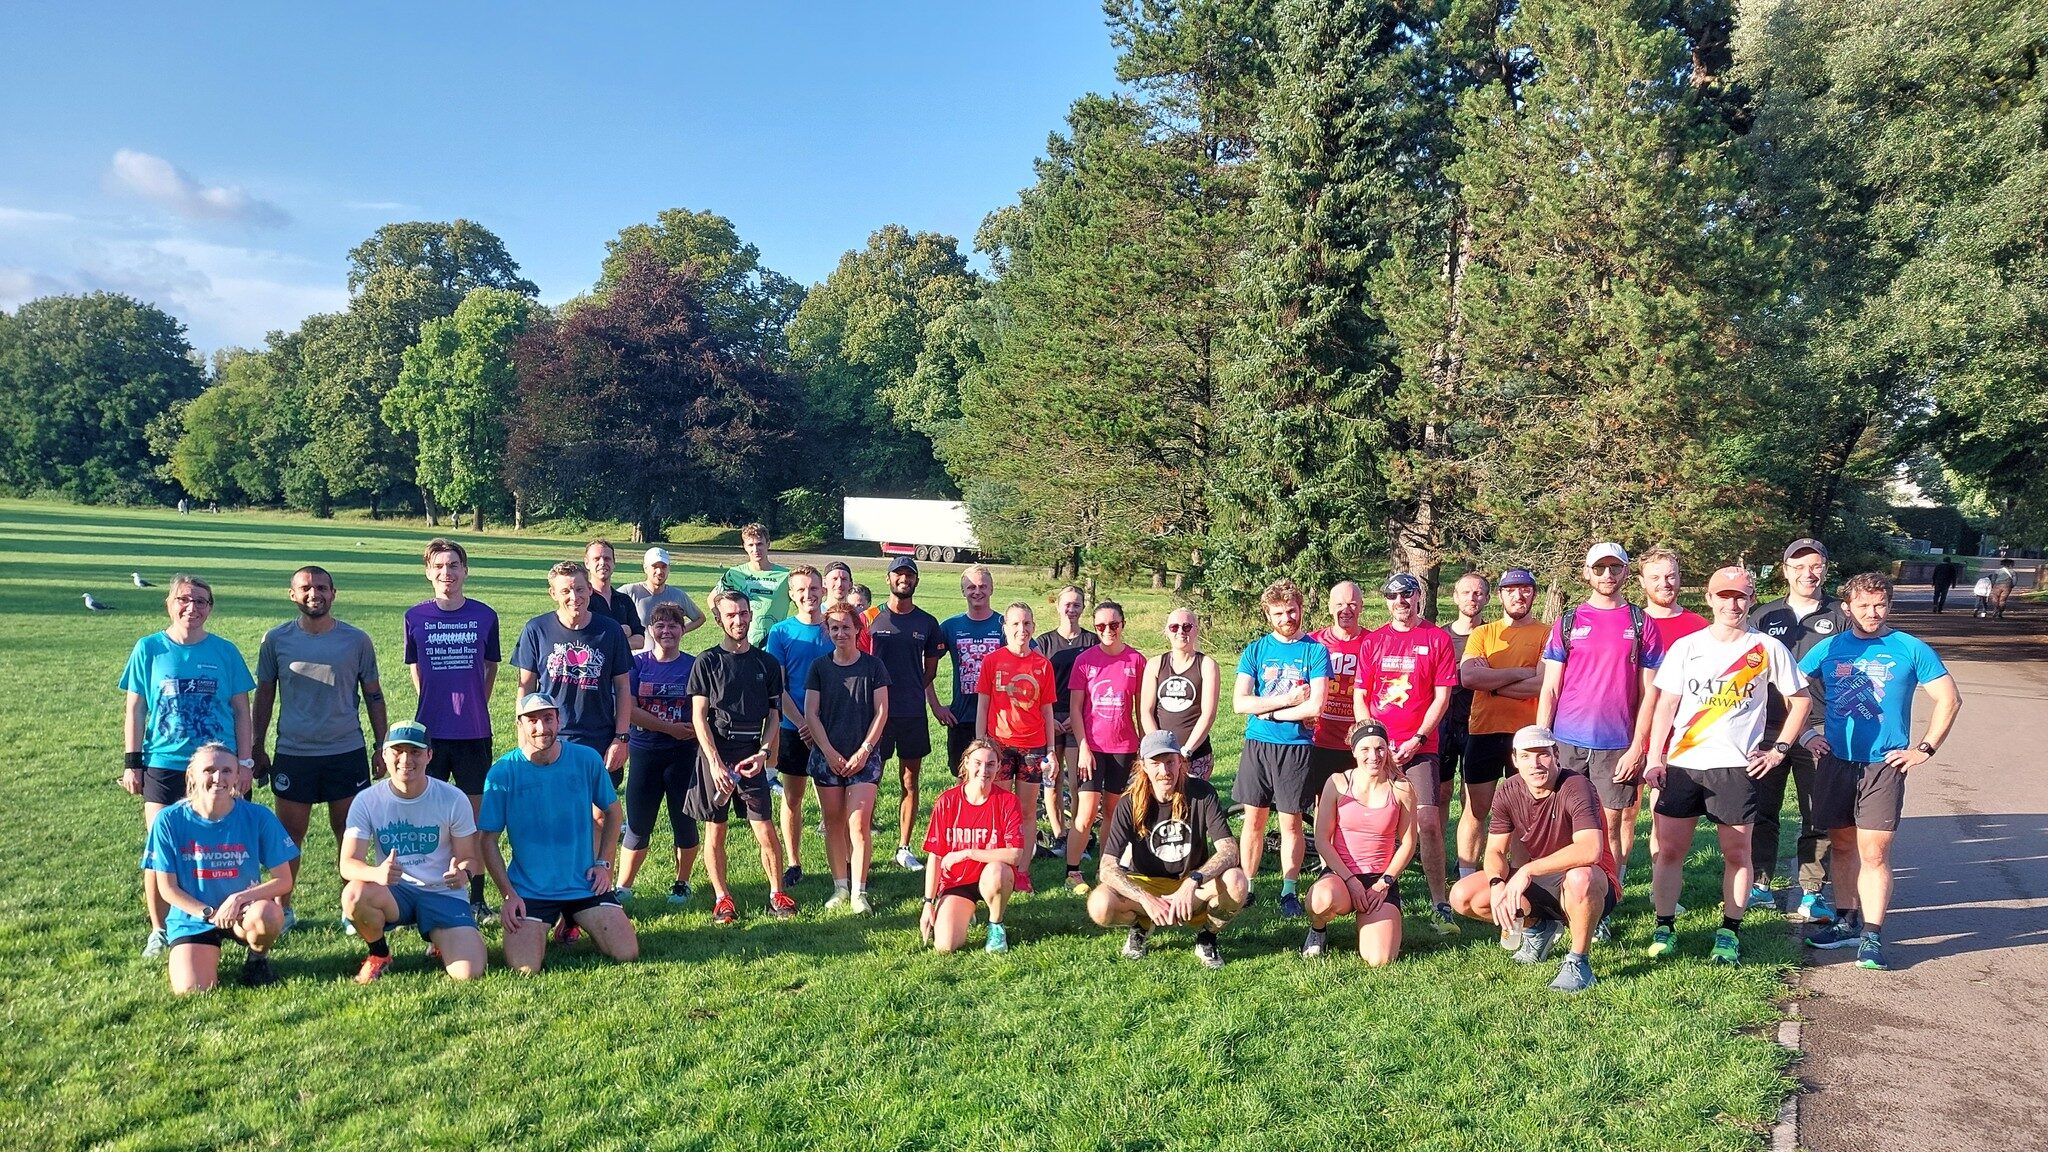 A large group of runners posing for a photo after a session in the park on a sunny day.